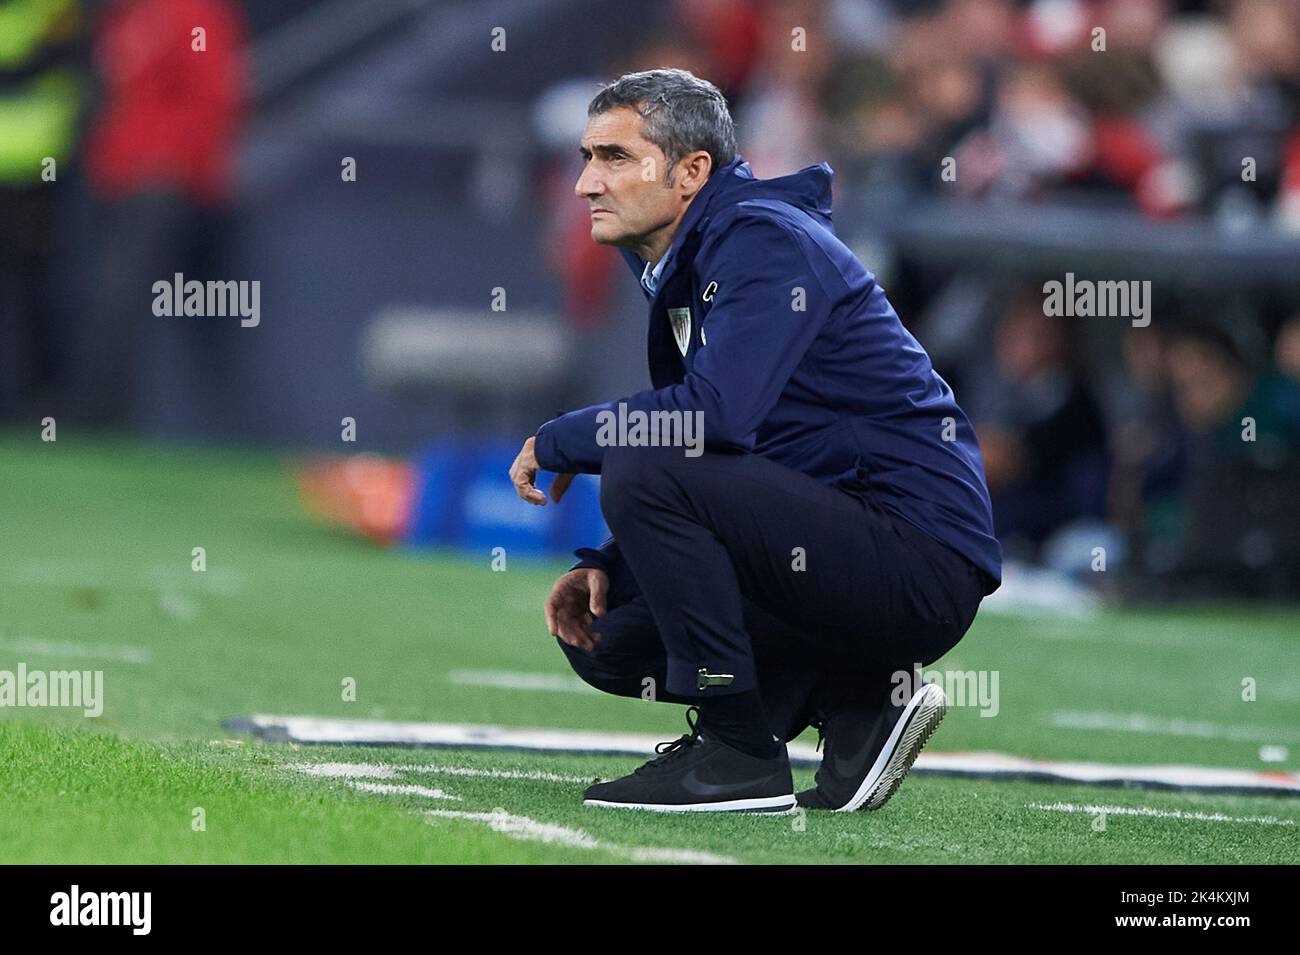 Athletic Club head coach Ernesto Valverde during the La Liga match between Athletic Club and UD Almeria played at Sam Mames Stadium on September 30, 2022 in Bilbao, Spain. (Photo by Cesar Ortiz / PRESSIN) Stock Photo